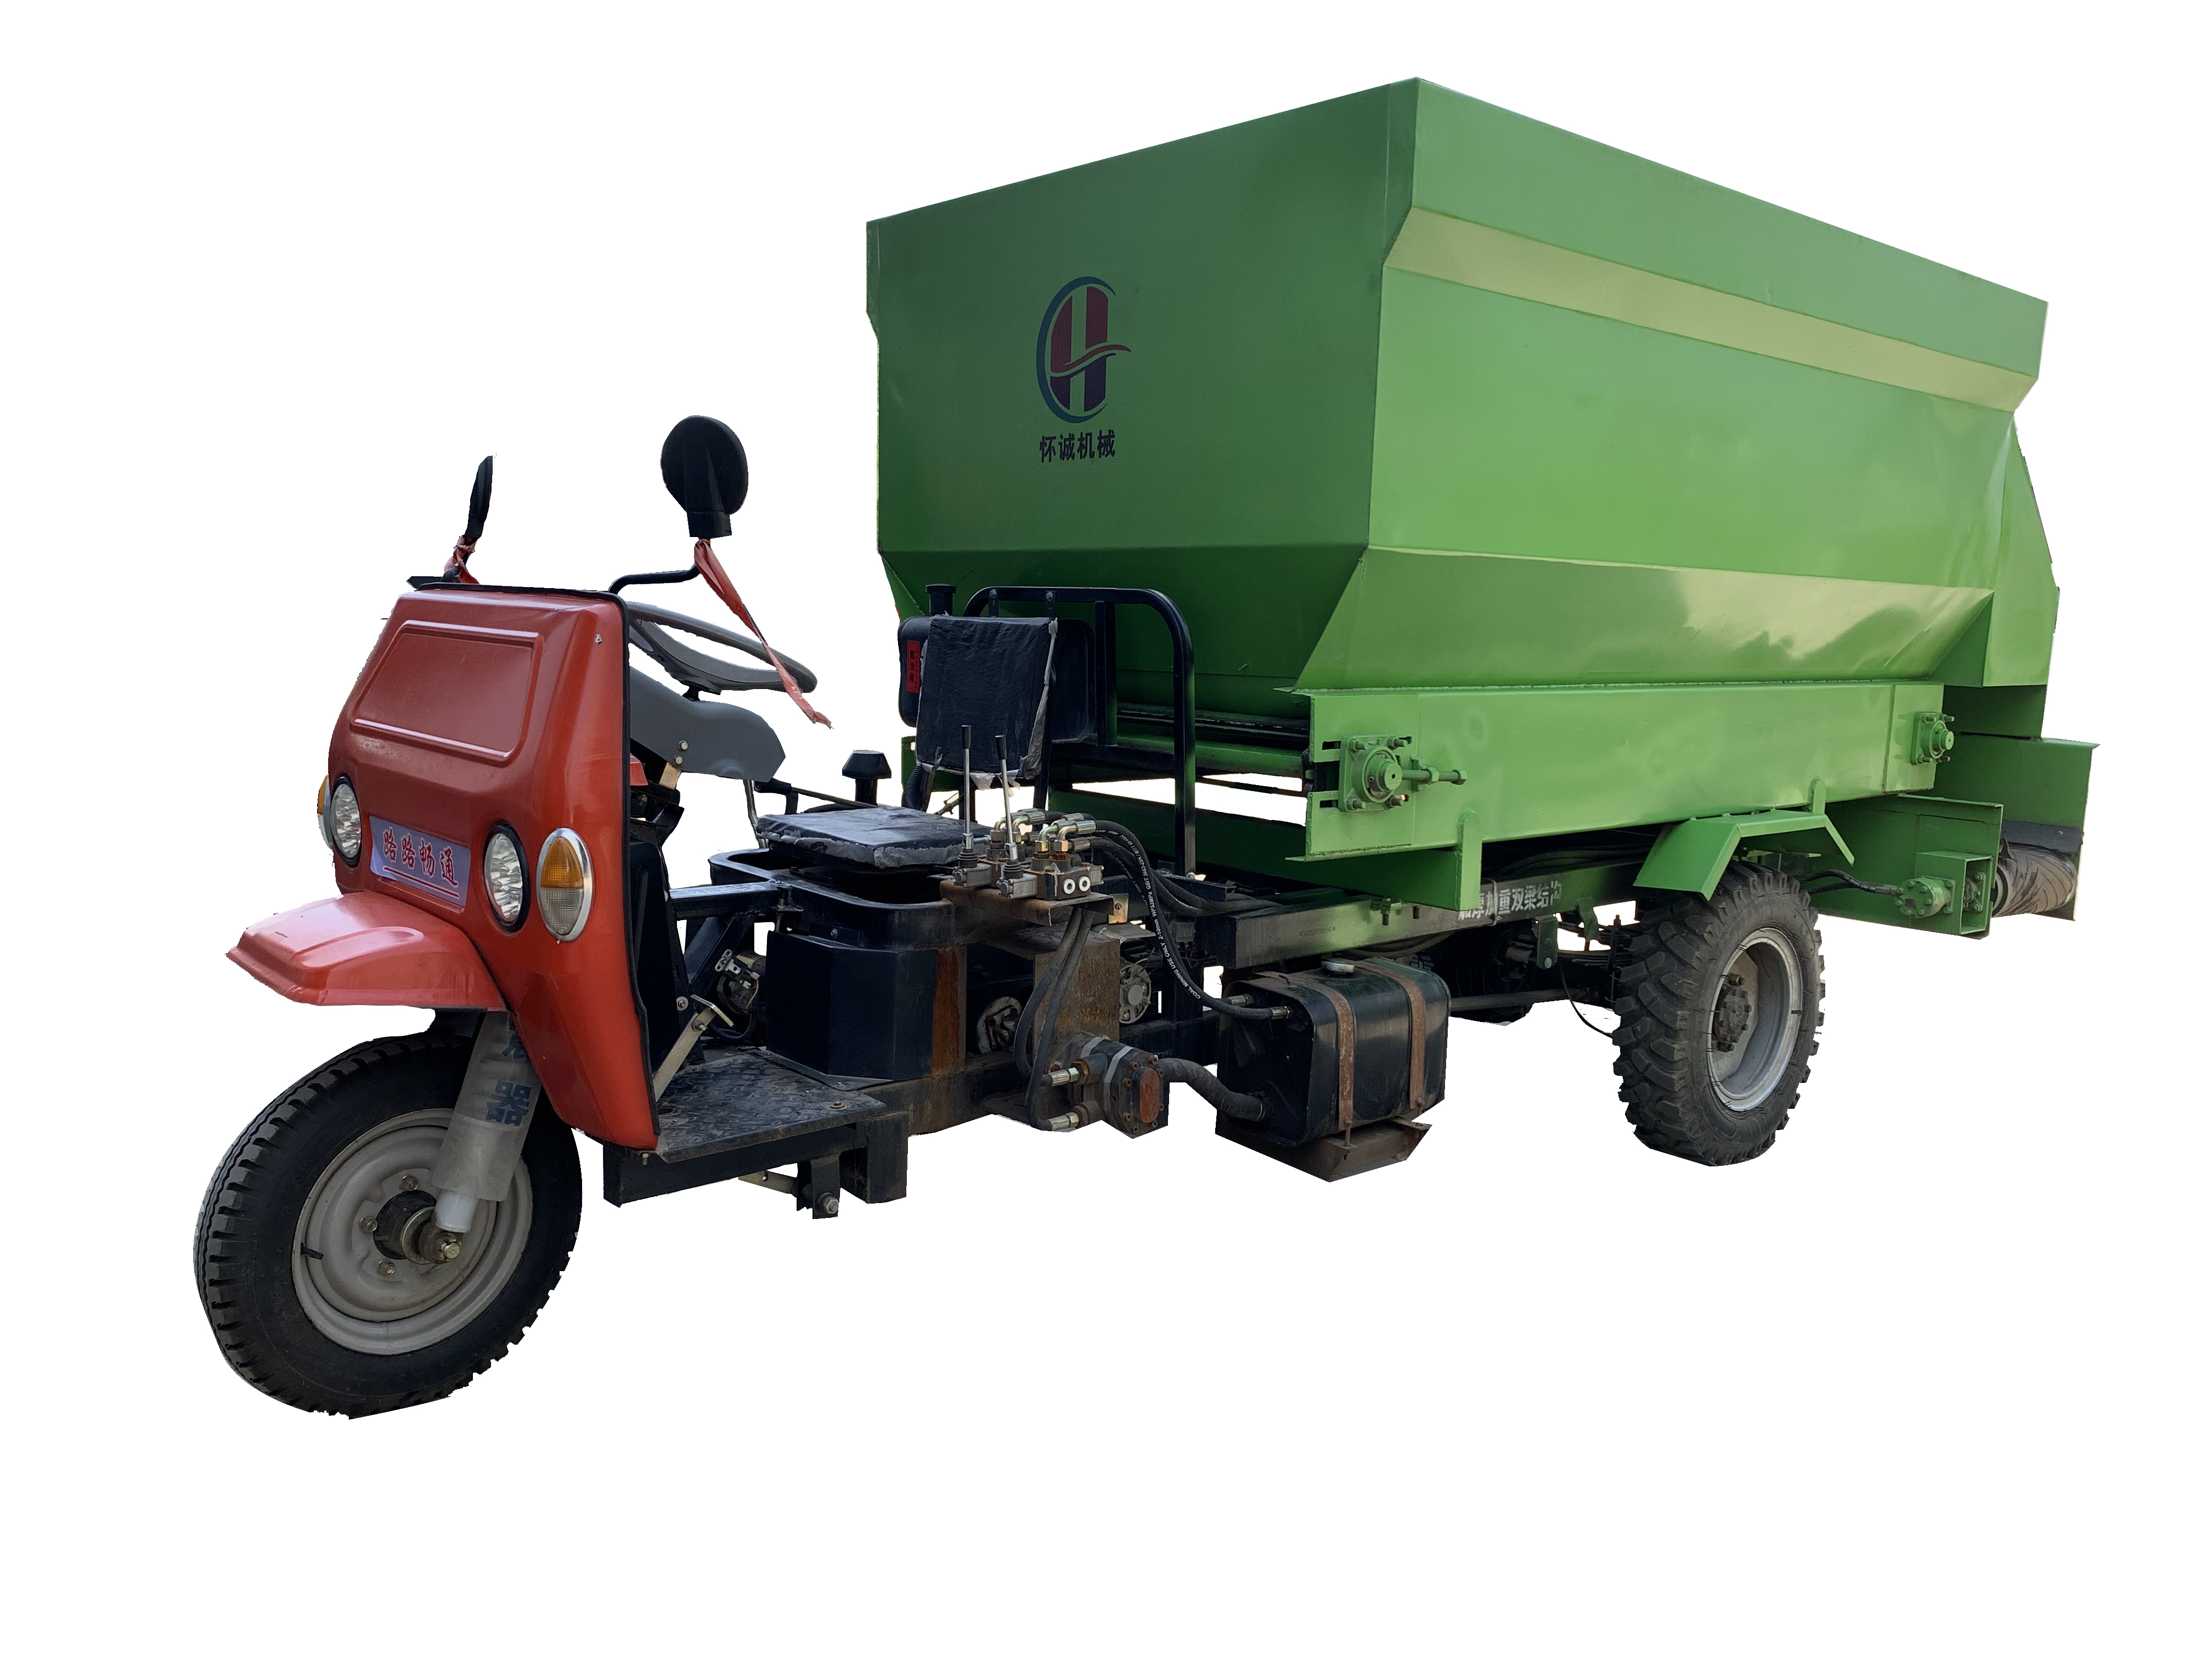 Suitable for farming manure cleaning work in various factories